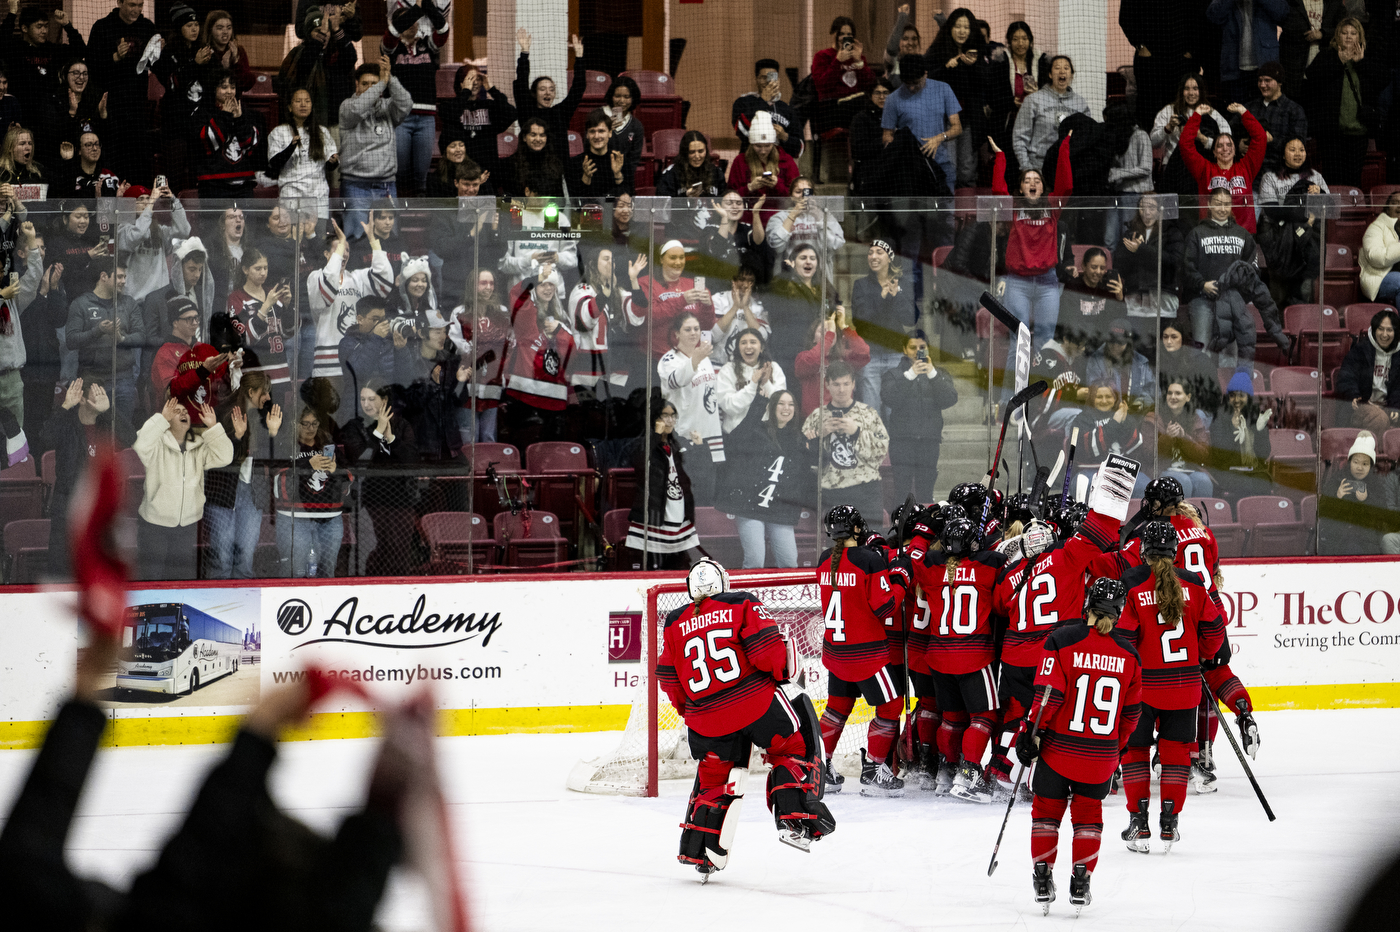 Northeastern hockey players cheer together in a circle while standing in an ice rink surrounded by cheering fans.